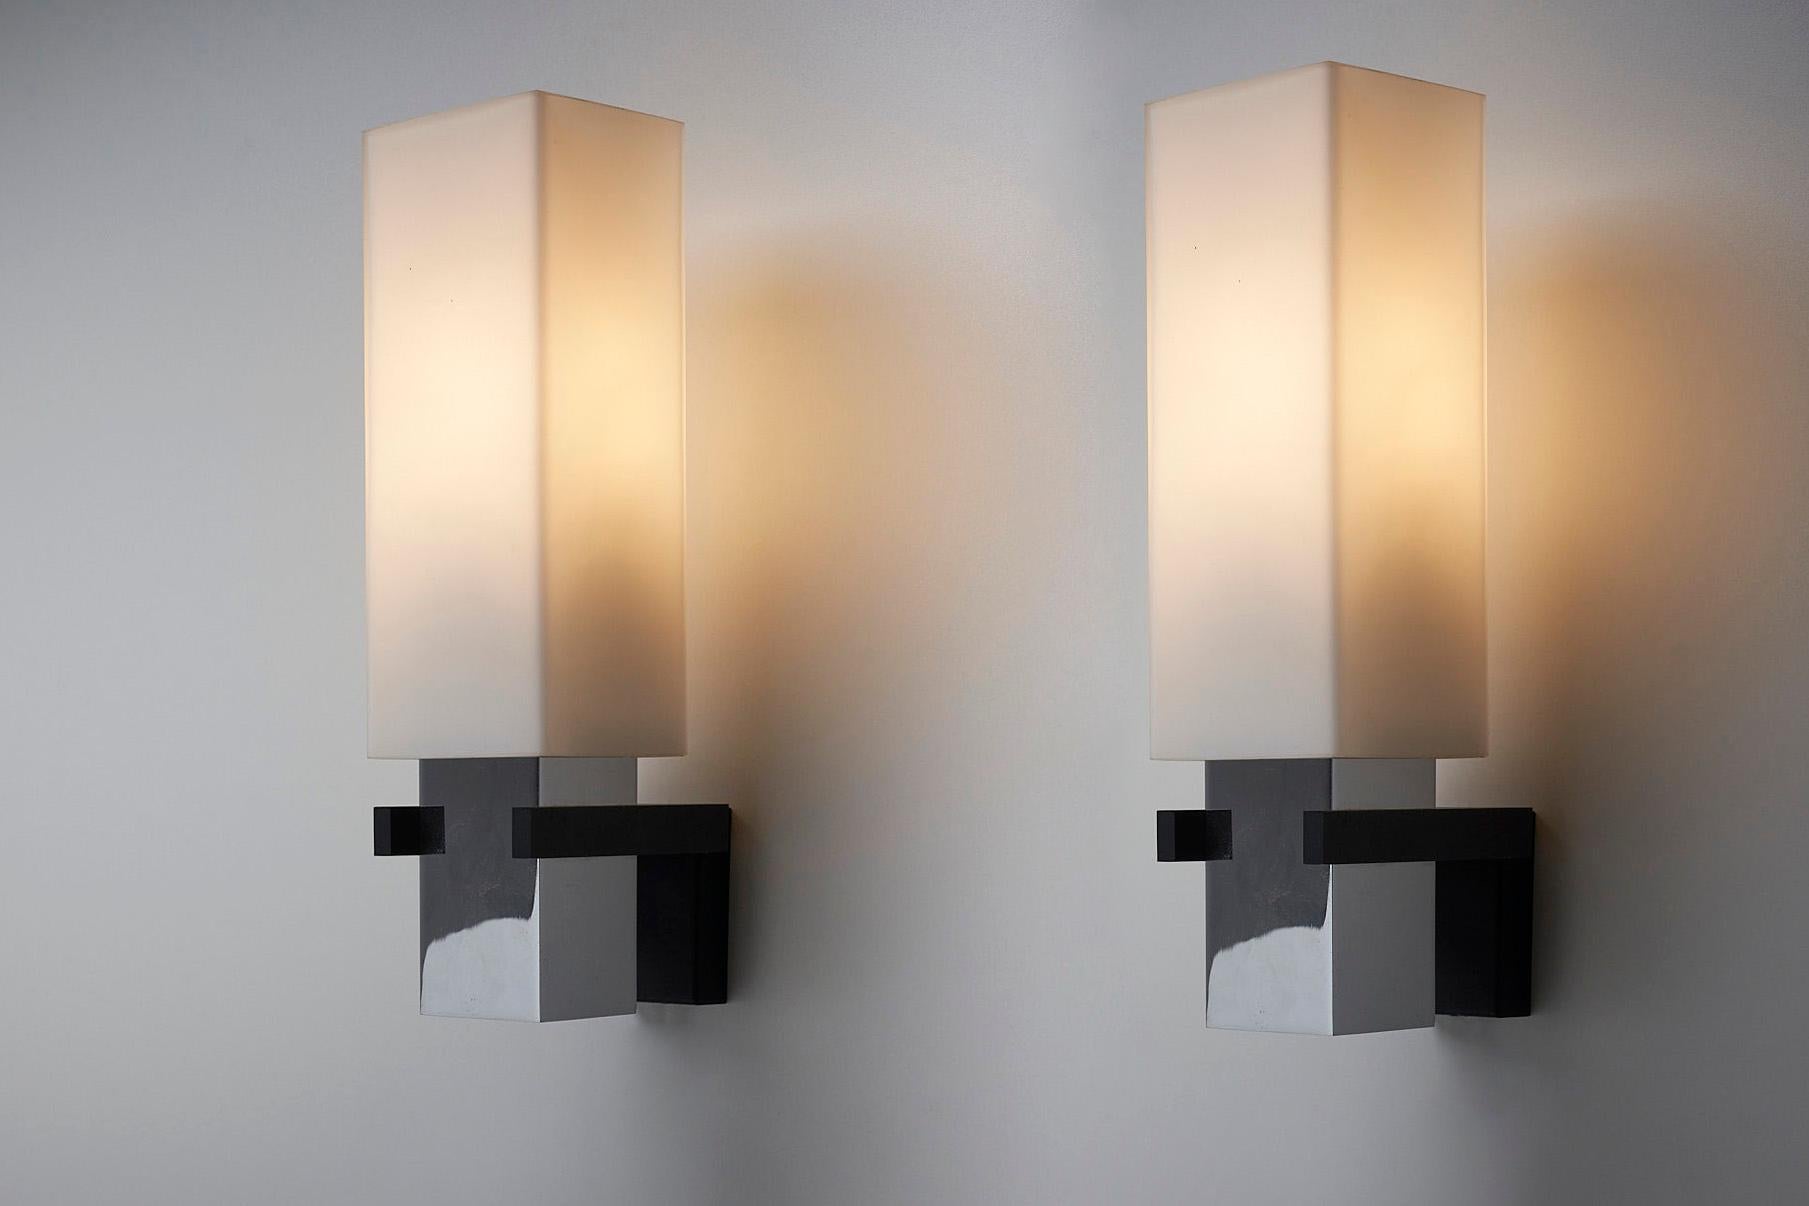 Introducing this Futuristic Wall Light designed by Cosack. This unique wall sconce exudes a futuristic appeal with its geometric design and thoughtful combination of materials.

The wall fixation features a sleek black plate with two small arms,